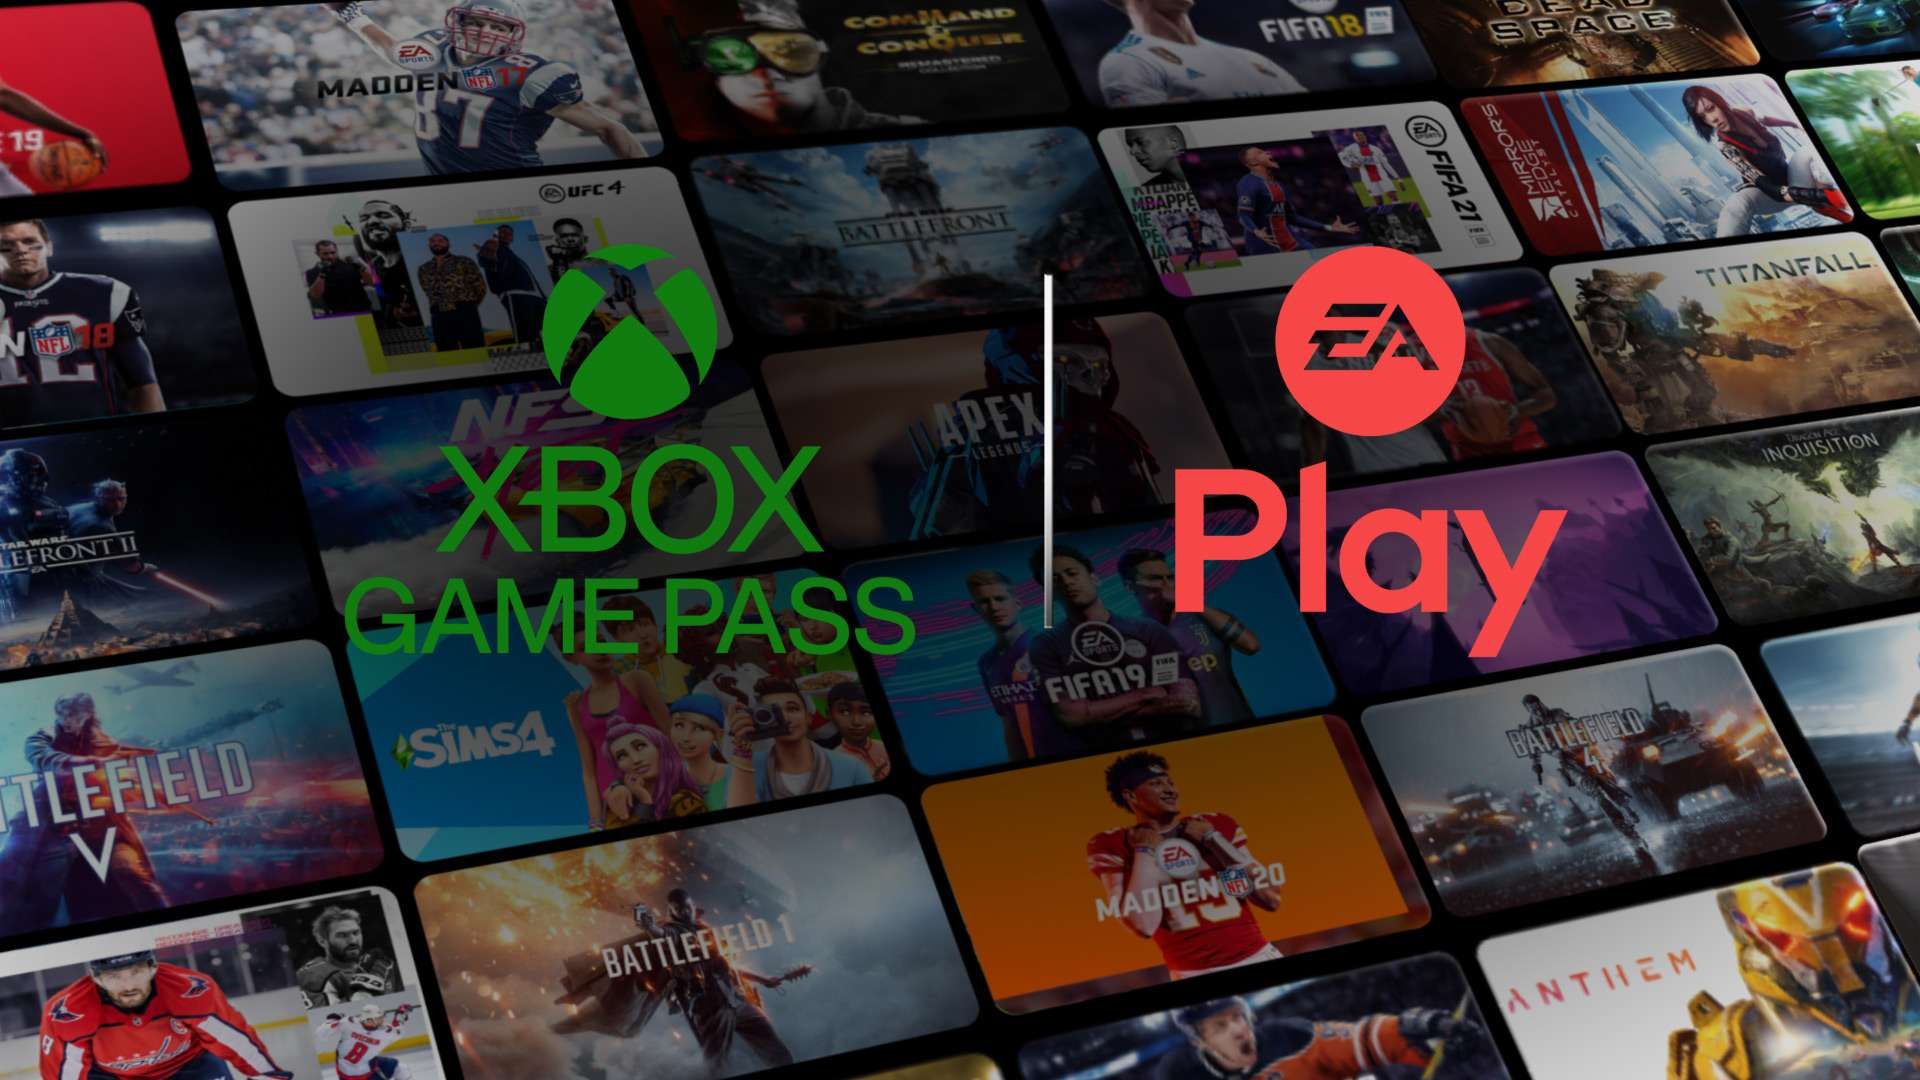 Xbox Game Pass and Ea Play